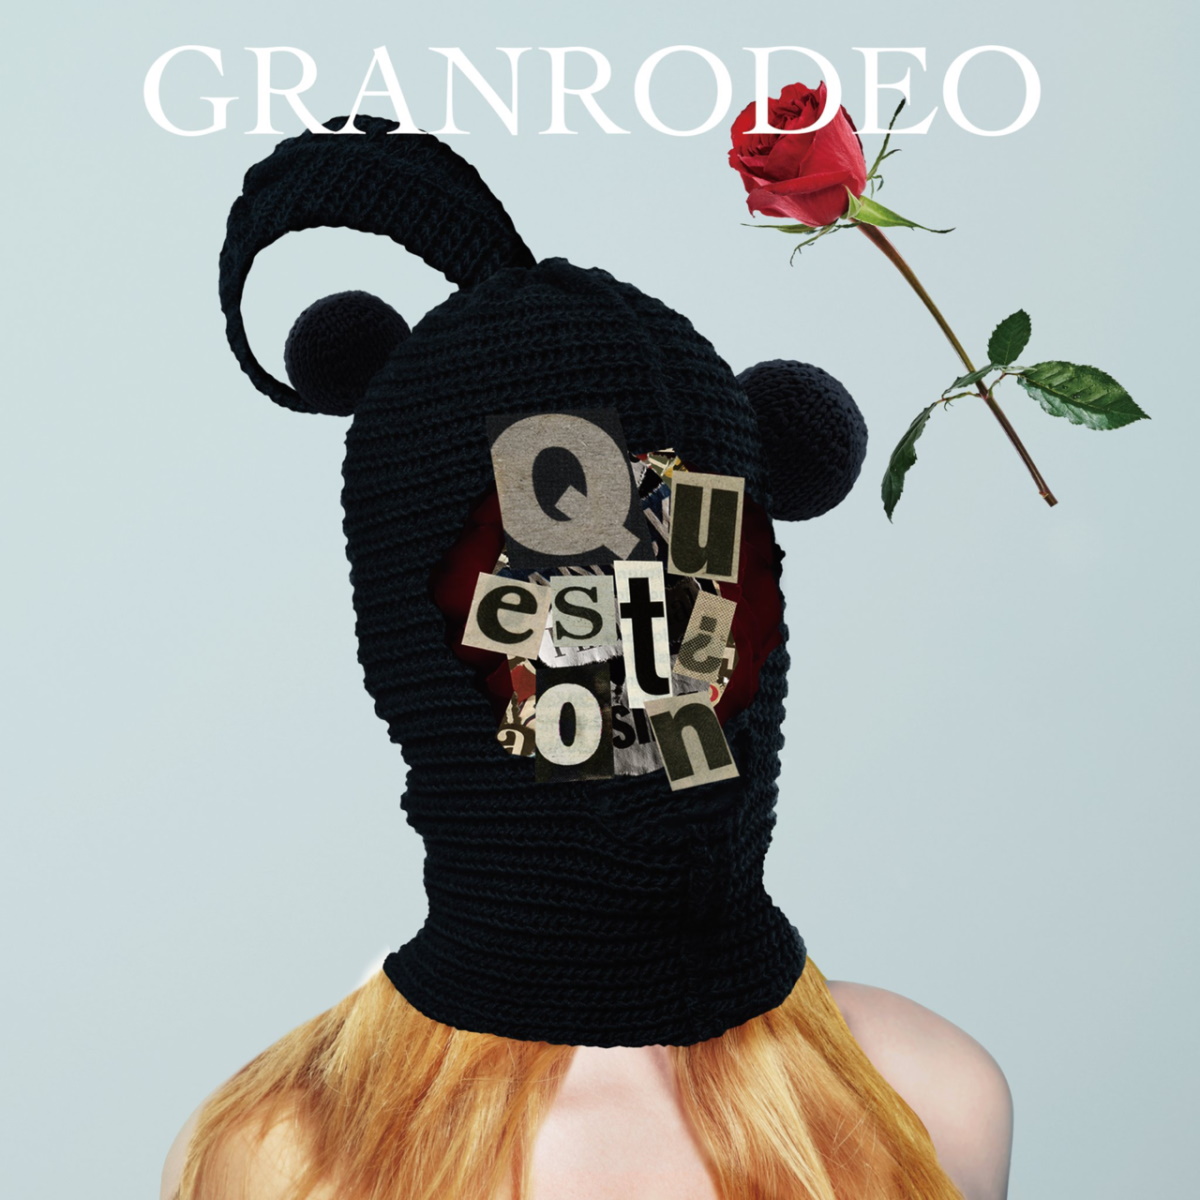 『GRANRODEO - Give me your eyes』収録の『Question』ジャケット